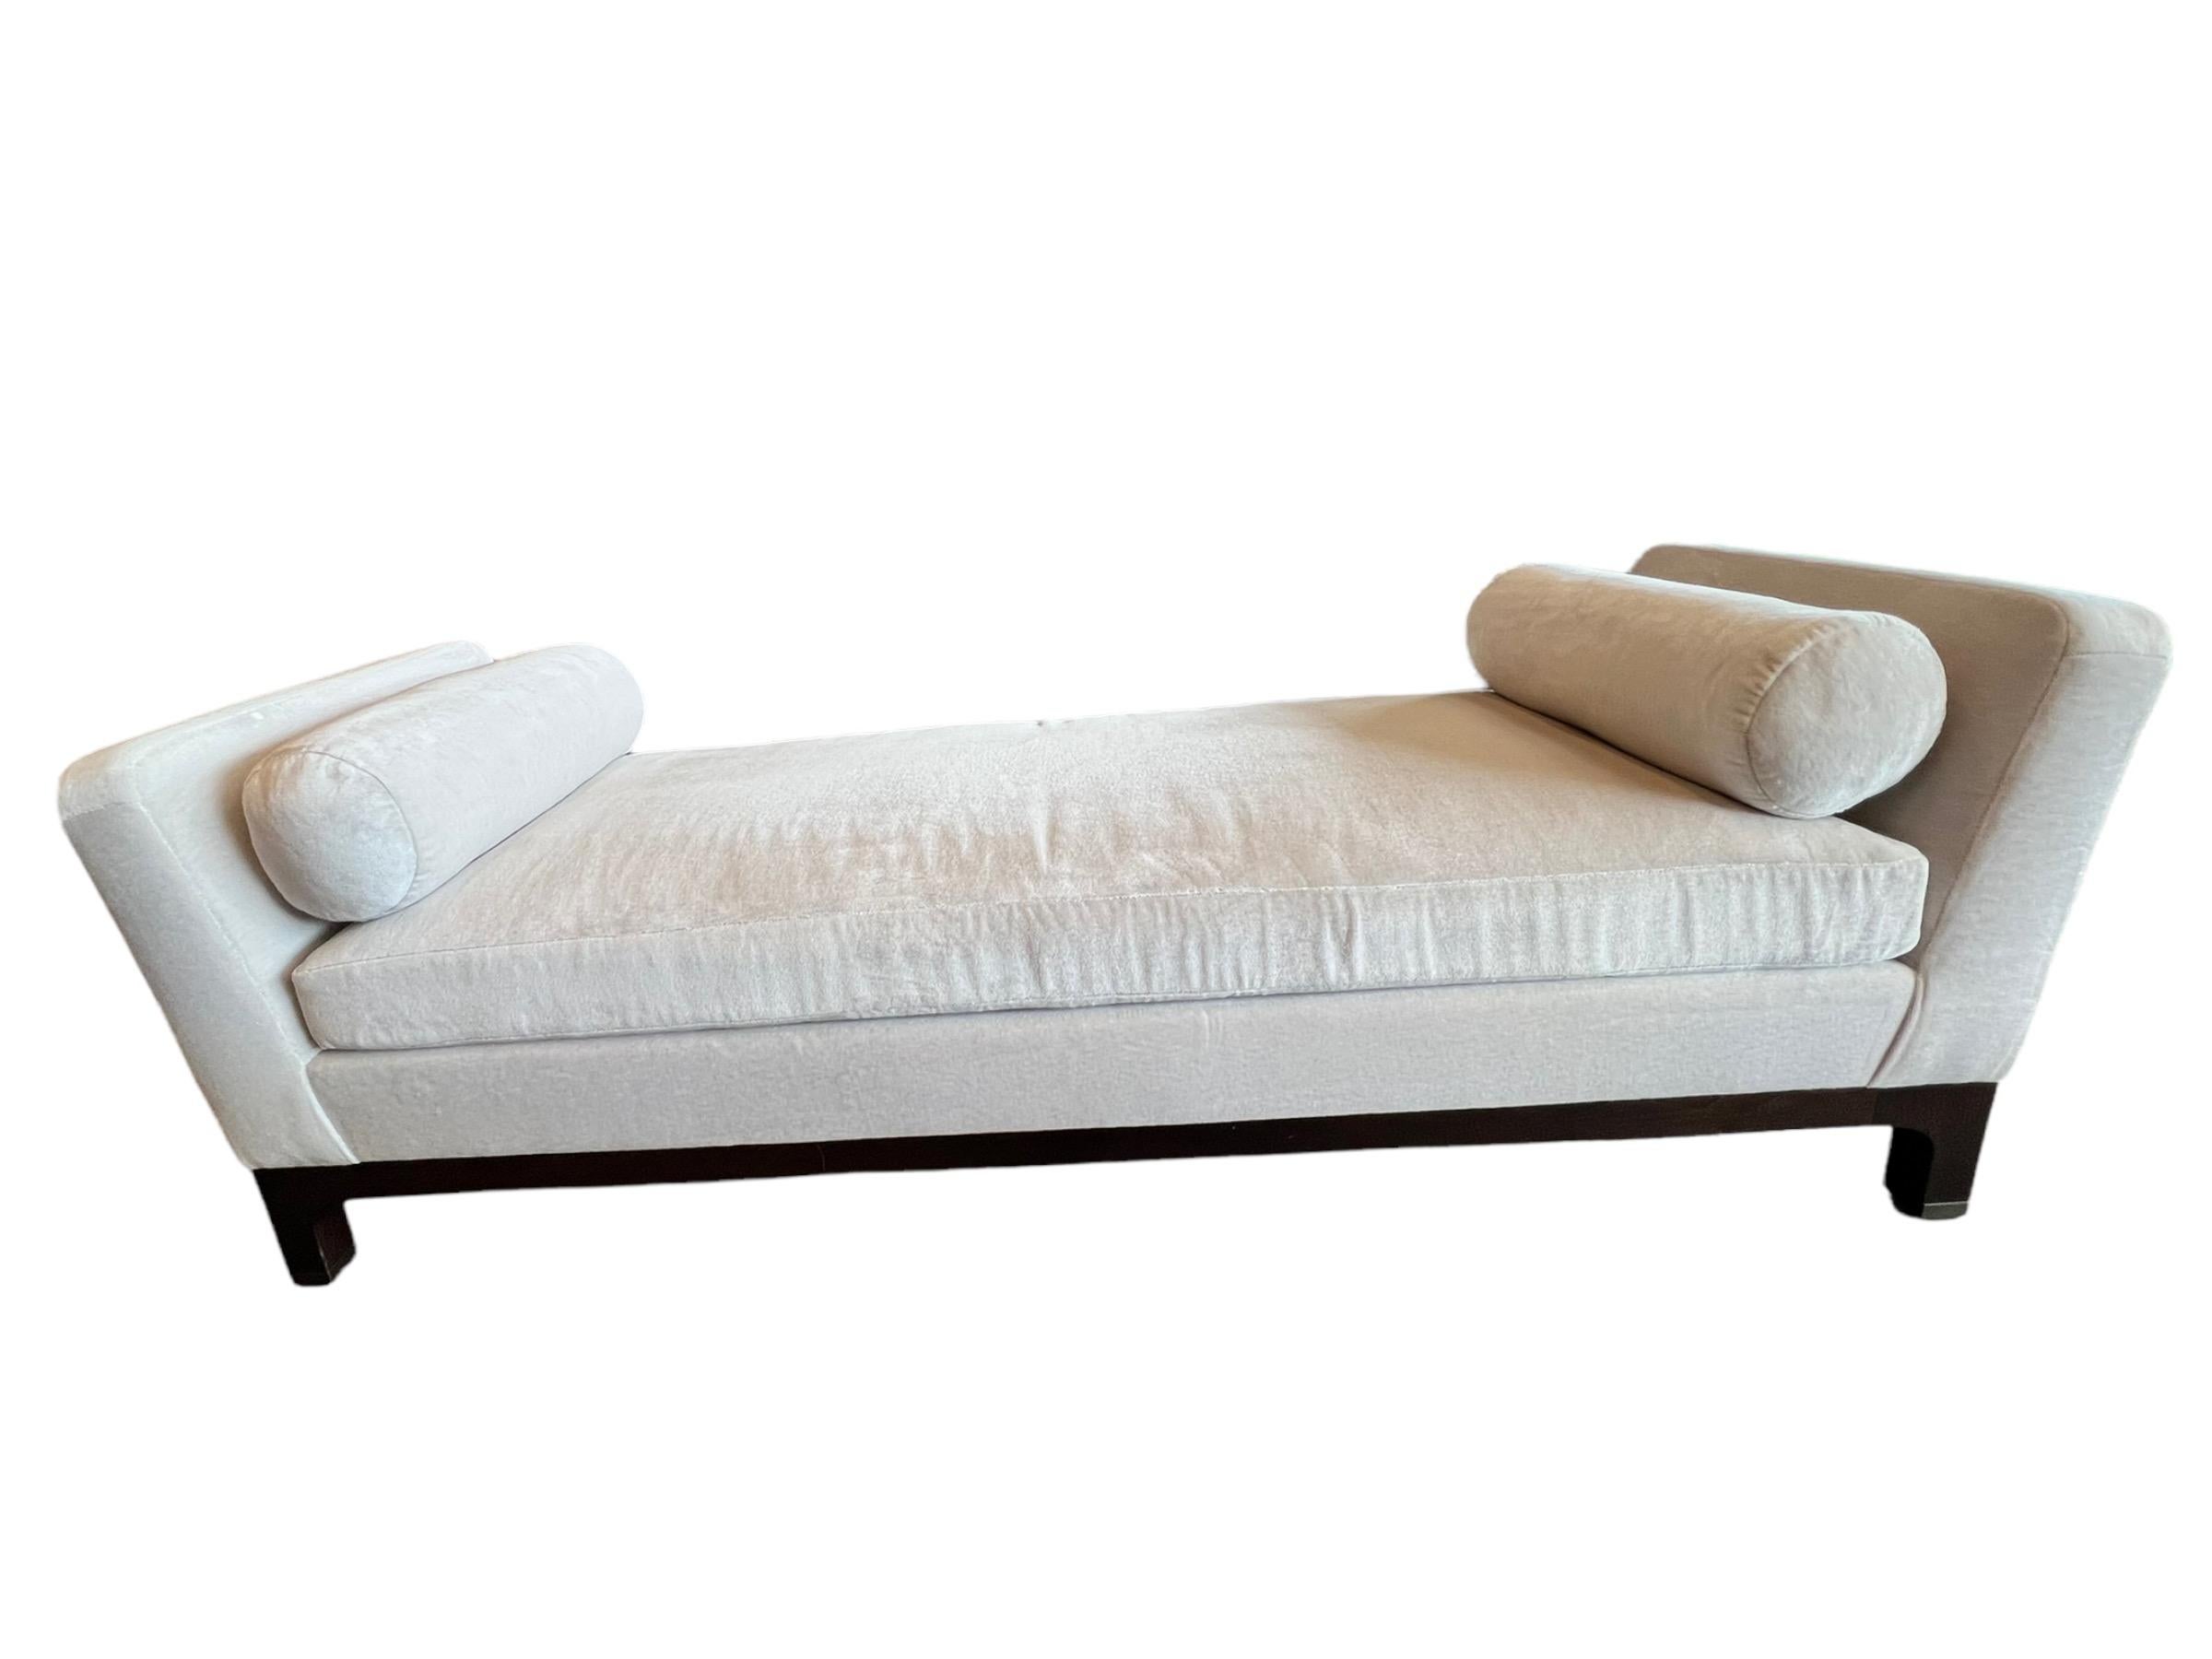 Contemporary Slipper Bench Designed by Ralph Rucci for Holly Hunt In Fair Condition For Sale In North Miami, FL